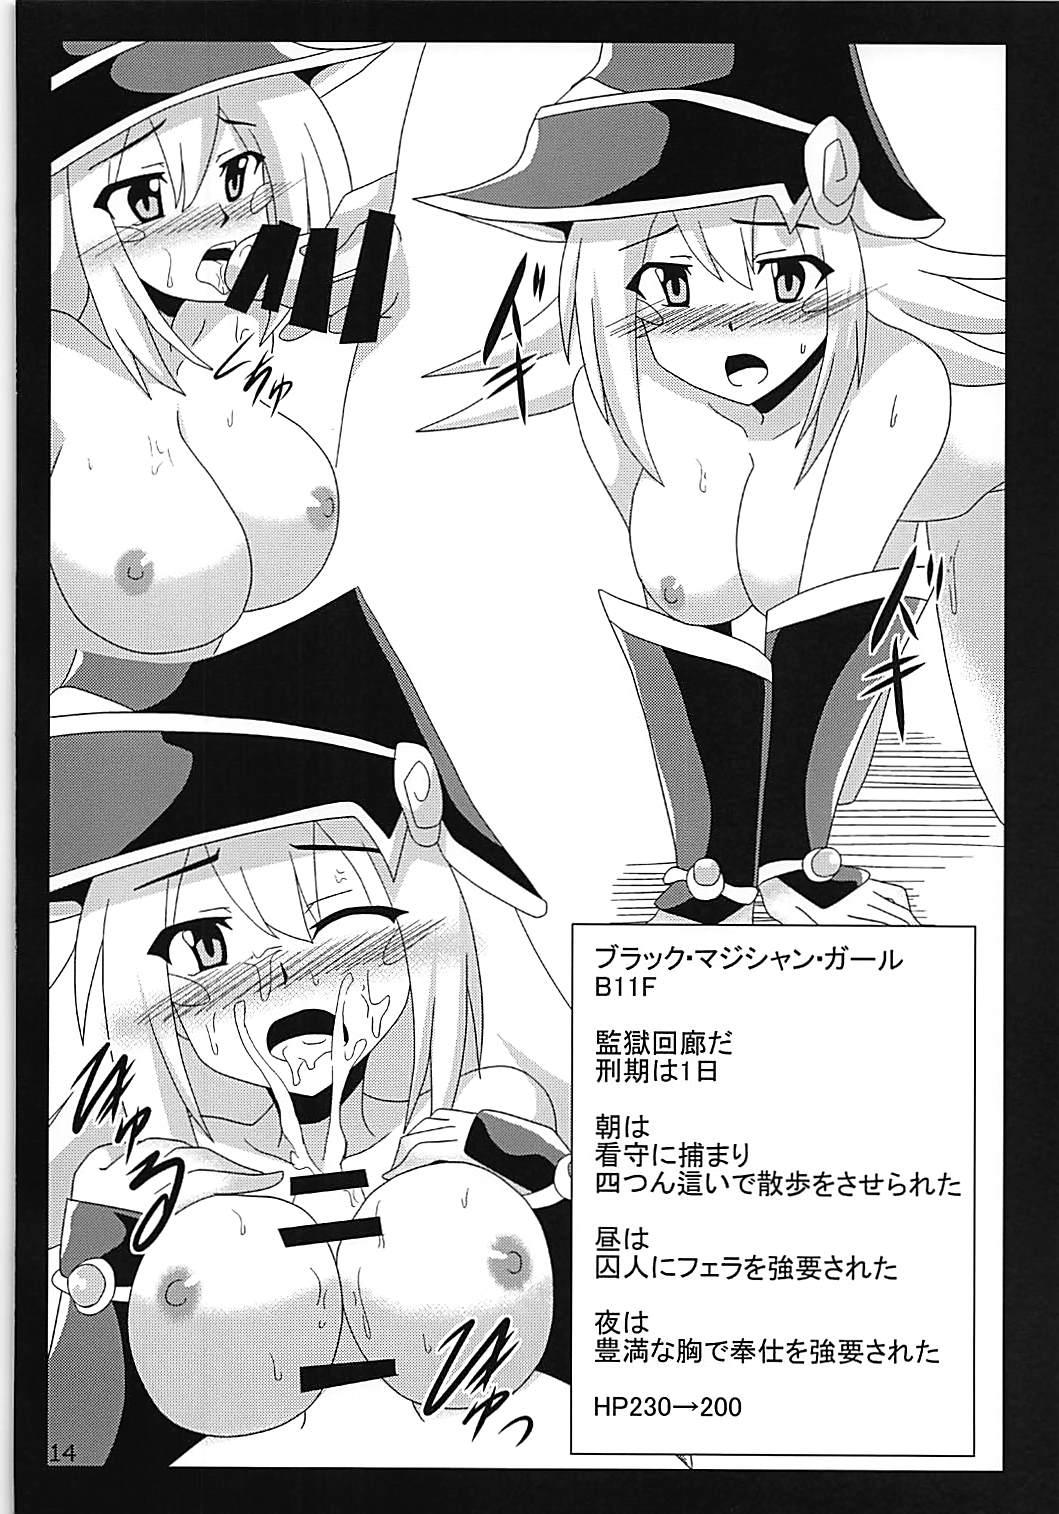 Tits BMG no Ero Trap Dungeon - Yu-gi-oh Blow Jobs - Page 13